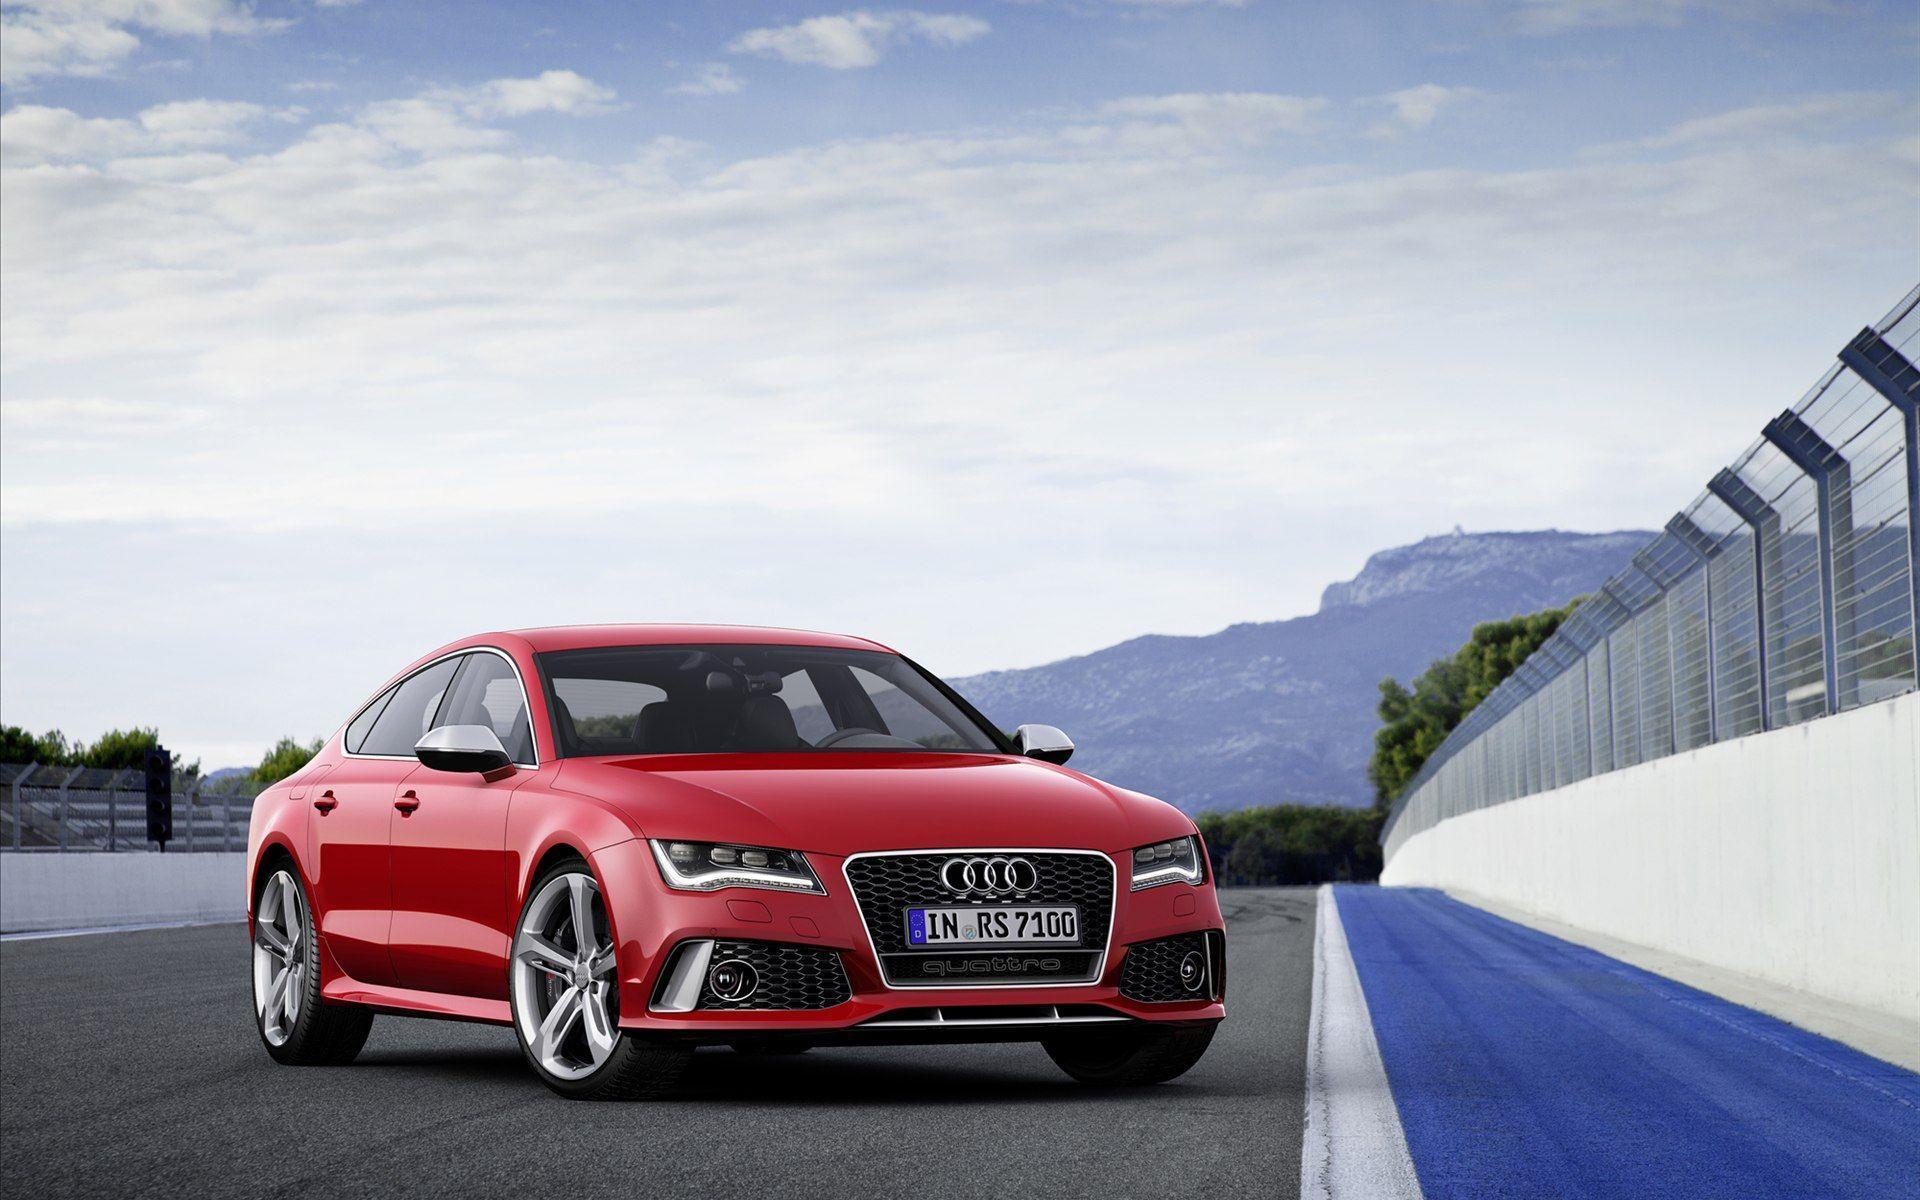 IGW128: Audi RS7 Wallpaper, Awesome Audi RS7 Background